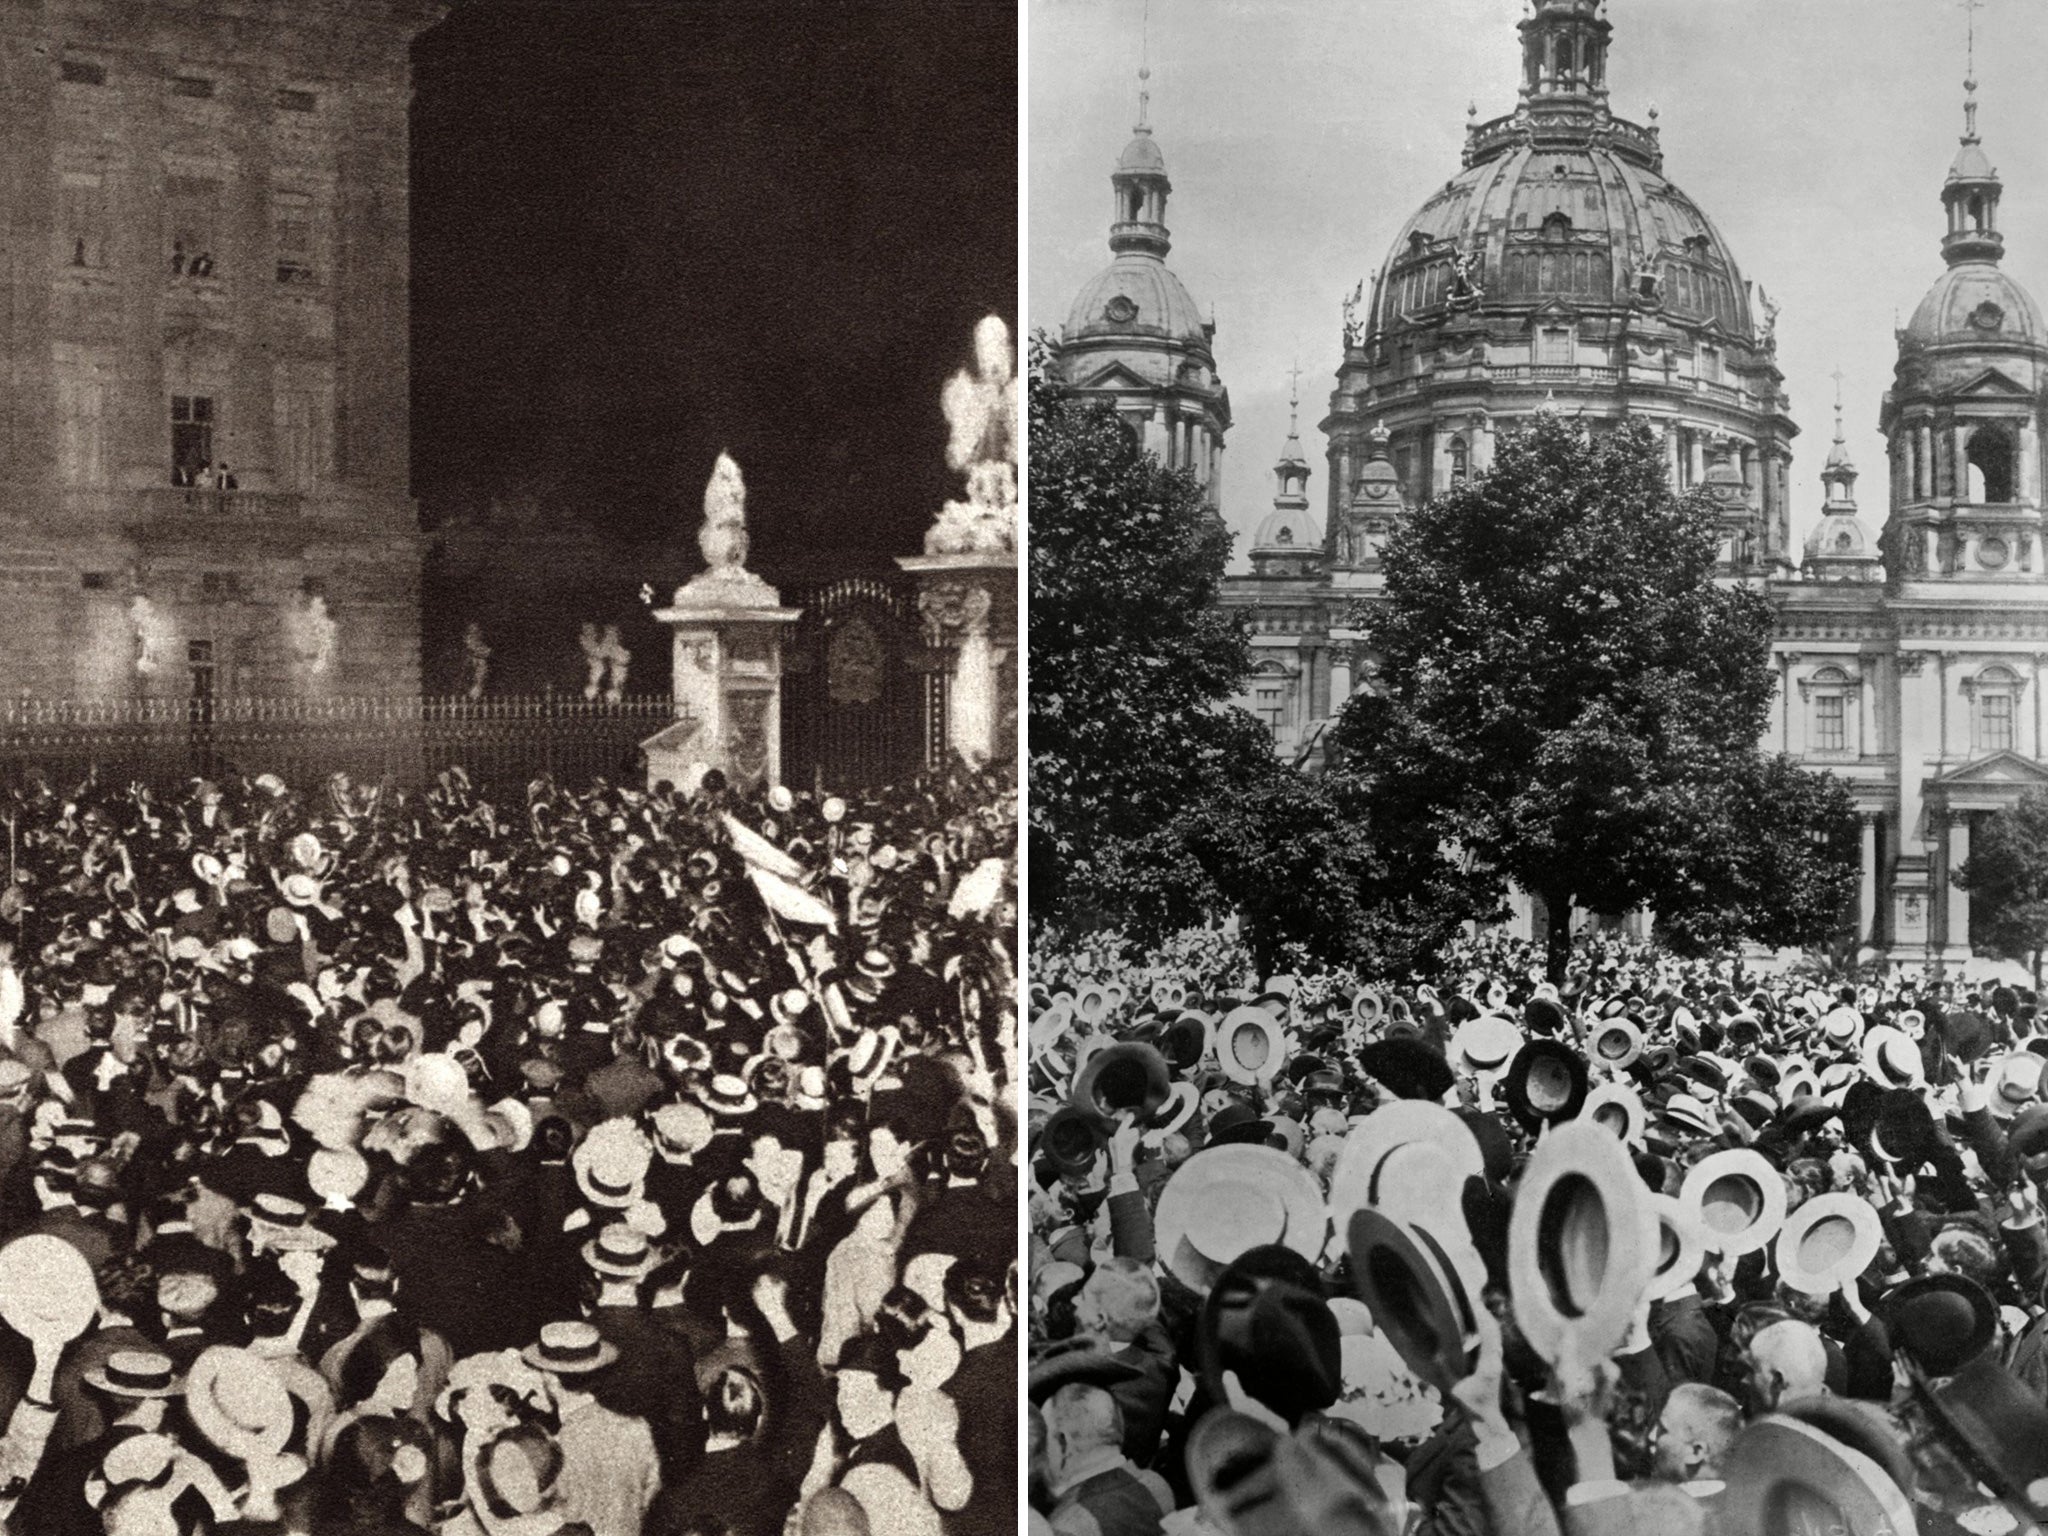 These images show the crowds outside Buckingham Palace and Berlin Cathedral in August 1914 as war was declared